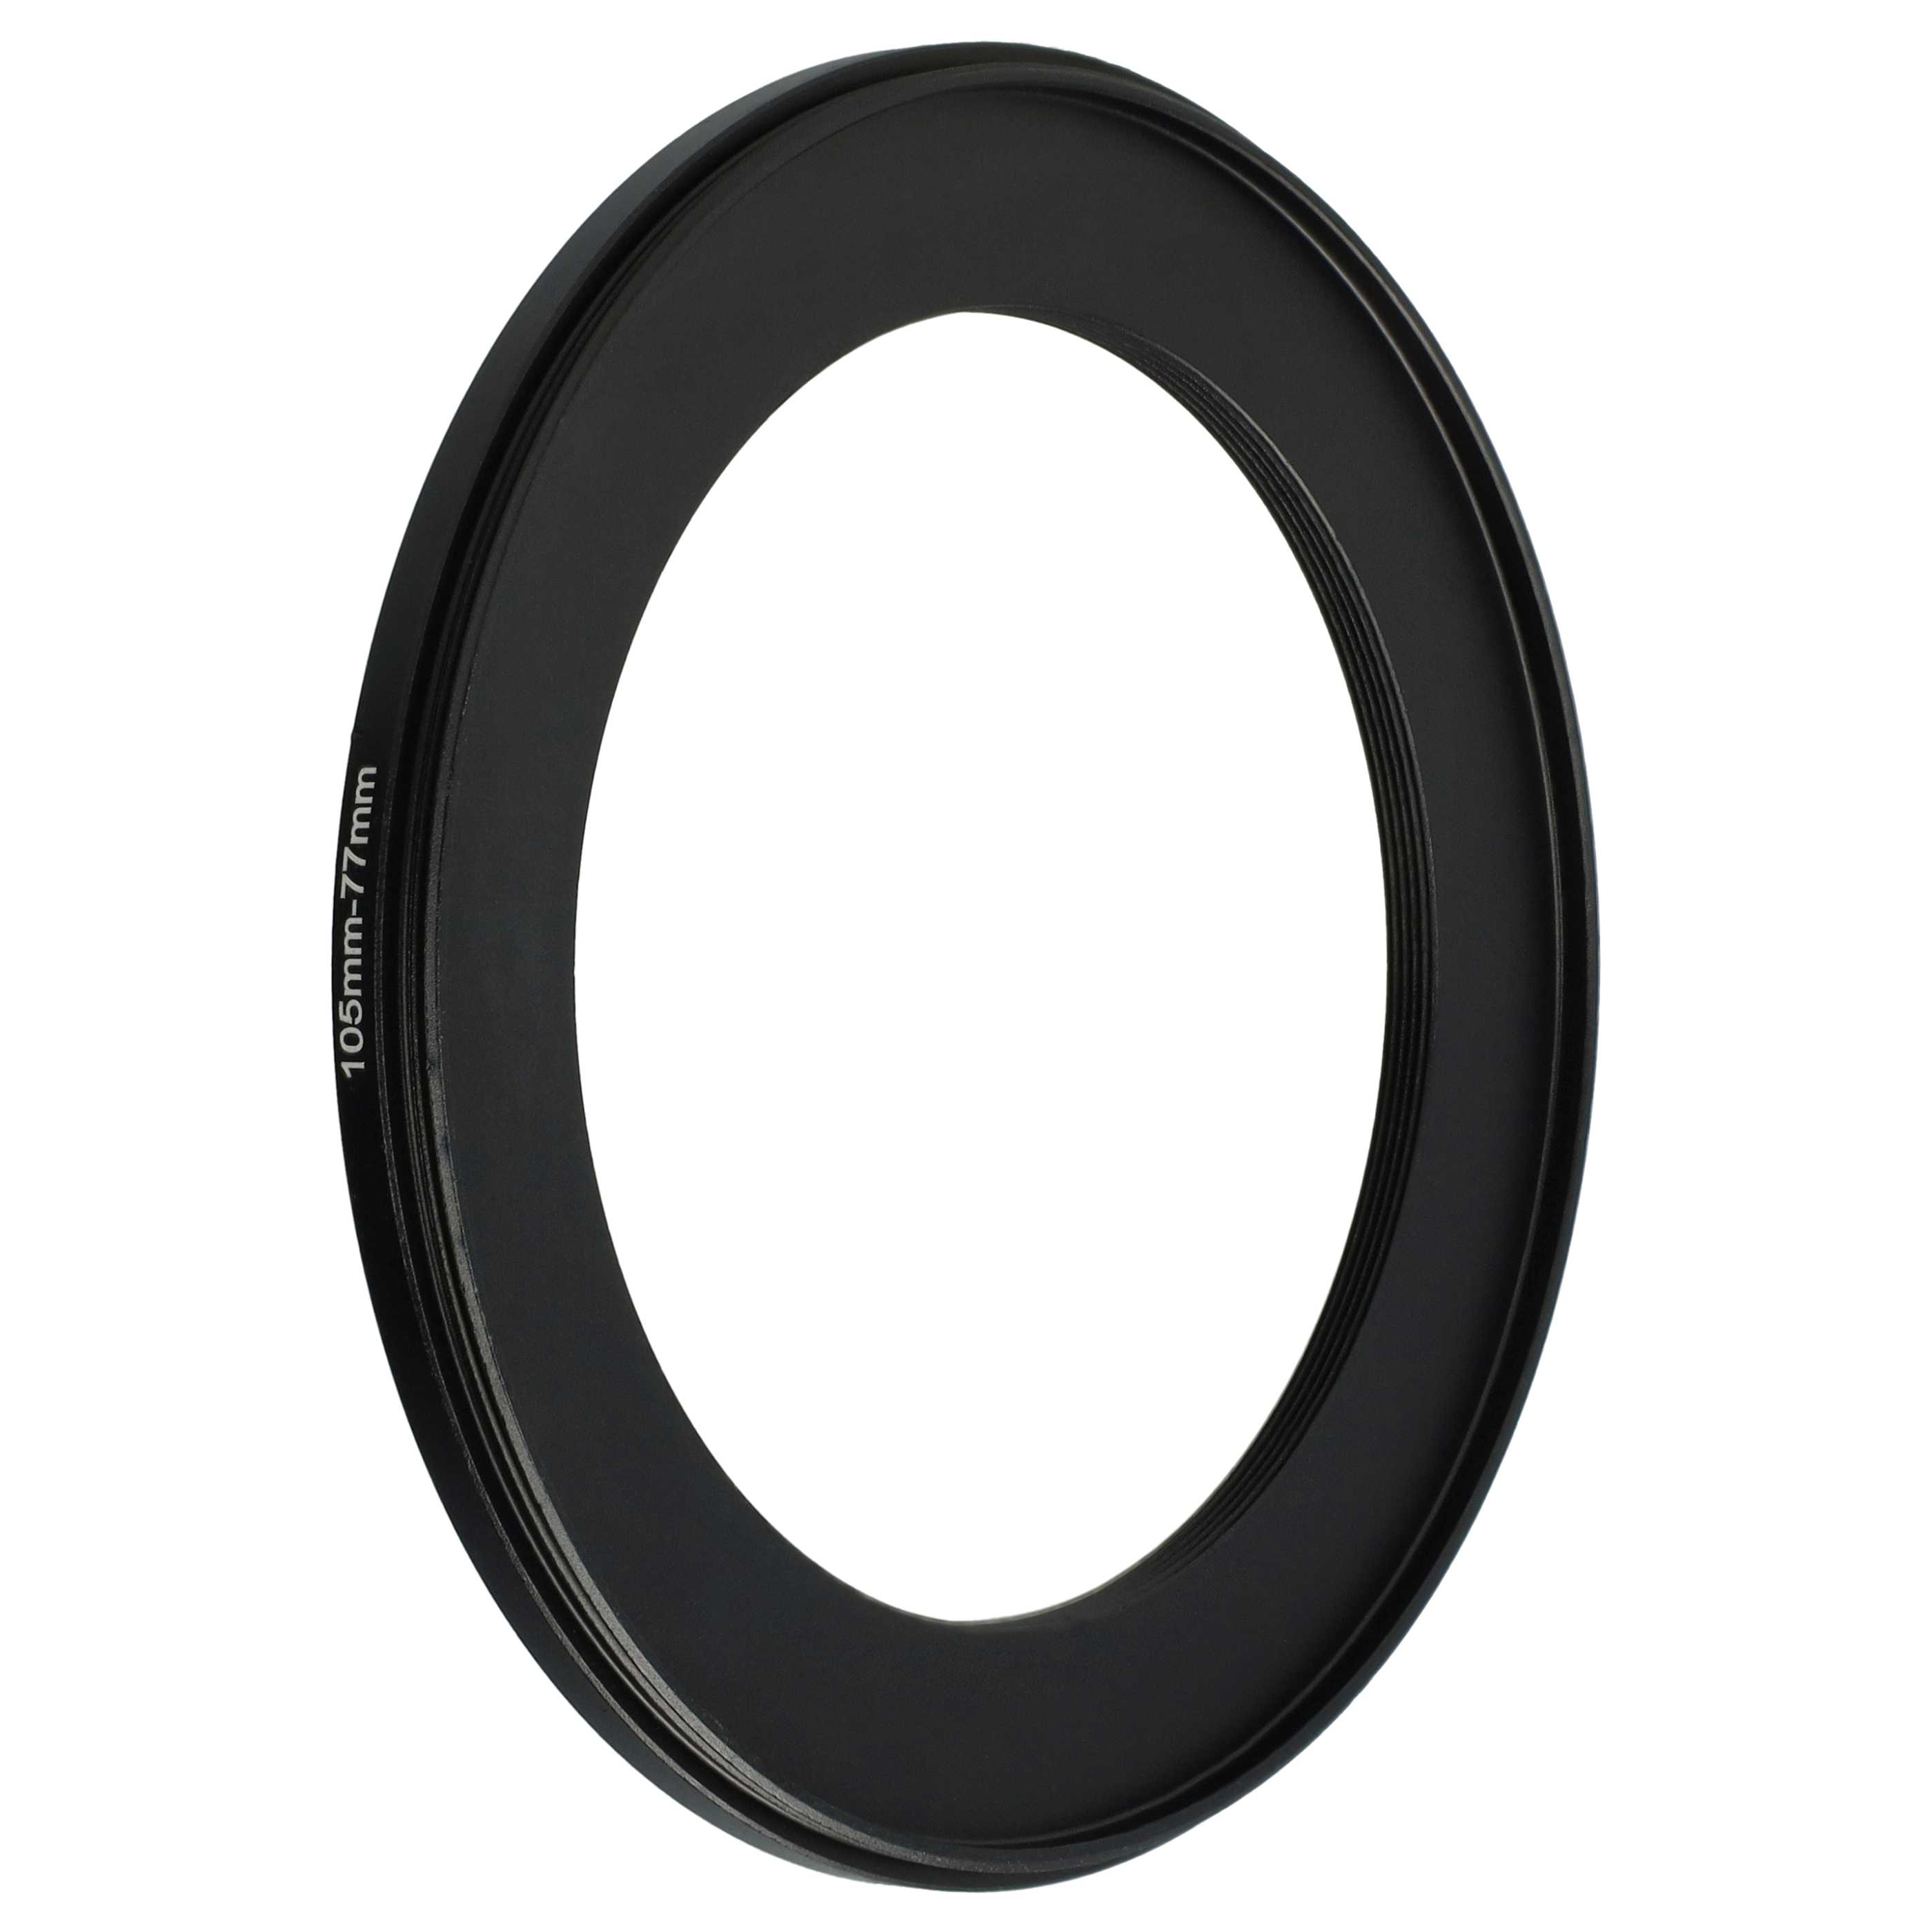 Step-Down Ring Adapter from 105 mm to 77 mm suitable for Camera Lens - Filter Adapter, metal